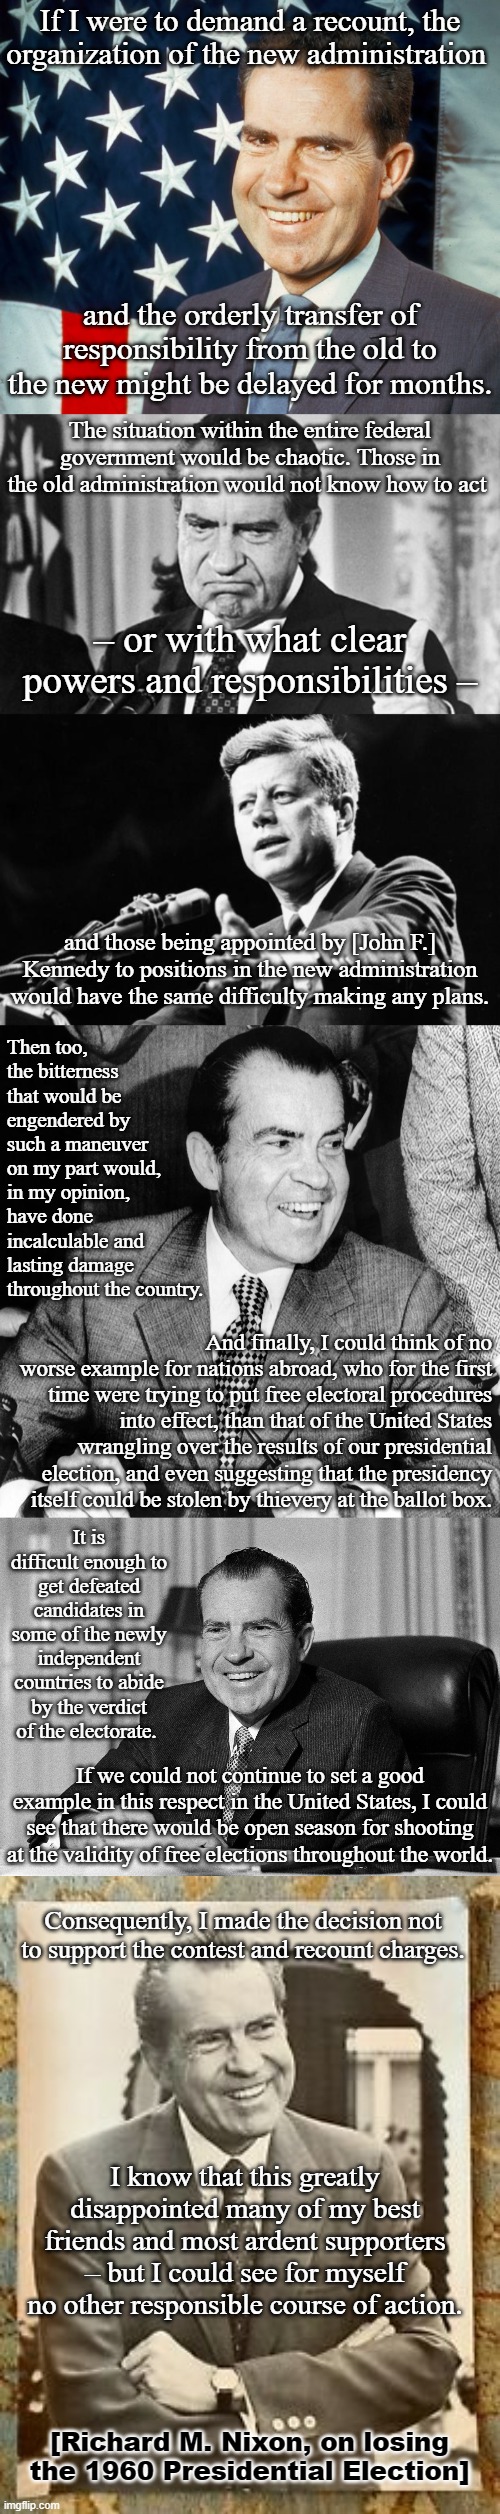 [tl;dr Richard Nixon may as well be George Washington compared to Orange Man] | If I were to demand a recount, the organization of the new administration; and the orderly transfer of responsibility from the old to the new might be delayed for months. The situation within the entire federal government would be chaotic. Those in the old administration would not know how to act; – or with what clear powers and responsibilities –; and those being appointed by [John F.] Kennedy to positions in the new administration would have the same difficulty making any plans. Then too, the bitterness that would be engendered by such a maneuver on my part would, in my opinion, have done incalculable and lasting damage throughout the country. And finally, I could think of no worse example for nations abroad, who for the first time were trying to put free electoral procedures into effect, than that of the United States wrangling over the results of our presidential election, and even suggesting that the presidency itself could be stolen by thievery at the ballot box. It is difficult enough to get defeated candidates in some of the newly independent countries to abide by the verdict of the electorate. If we could not continue to set a good example in this respect in the United States, I could see that there would be open season for shooting at the validity of free elections throughout the world. Consequently, I made the decision not to support the contest and recount charges. I know that this greatly disappointed many of my best friends and most ardent supporters – but I could see for myself no other responsible course of action. [Richard M. Nixon, on losing the 1960 Presidential Election] | image tagged in richard nixon patriotic,richard nixon thumbs up,jfk,richard nixon smiling,democracy,election 2020 | made w/ Imgflip meme maker